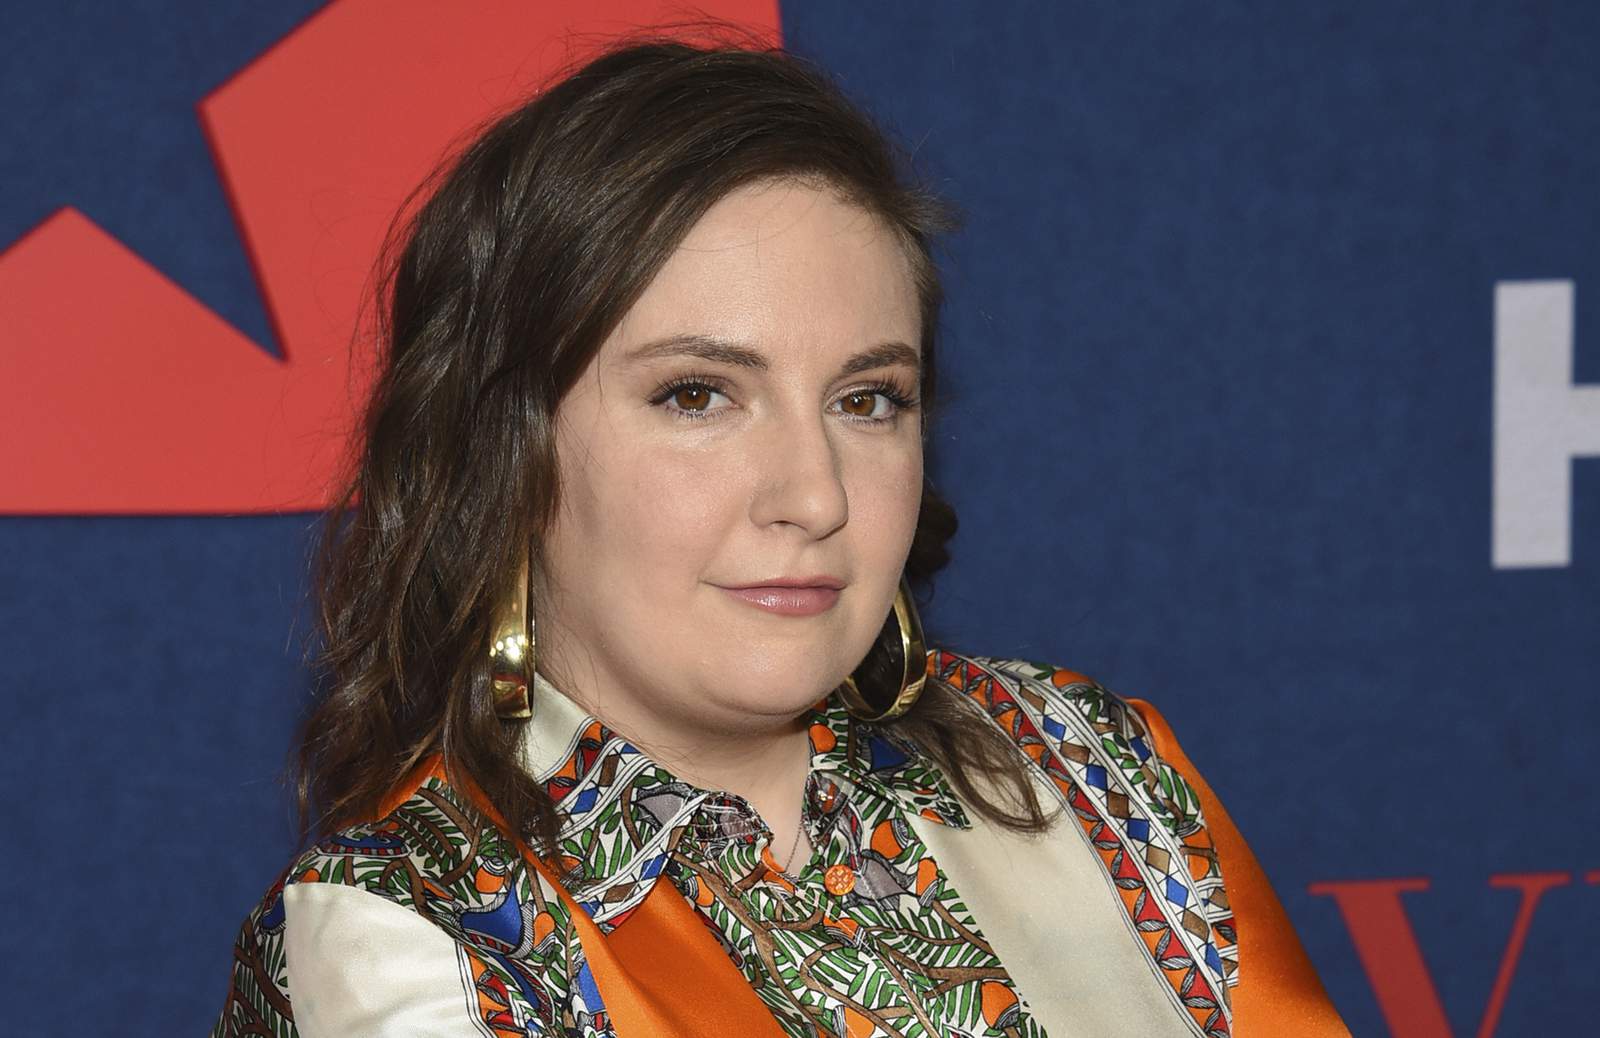 Lena Dunham says her body revolted under COVID-19